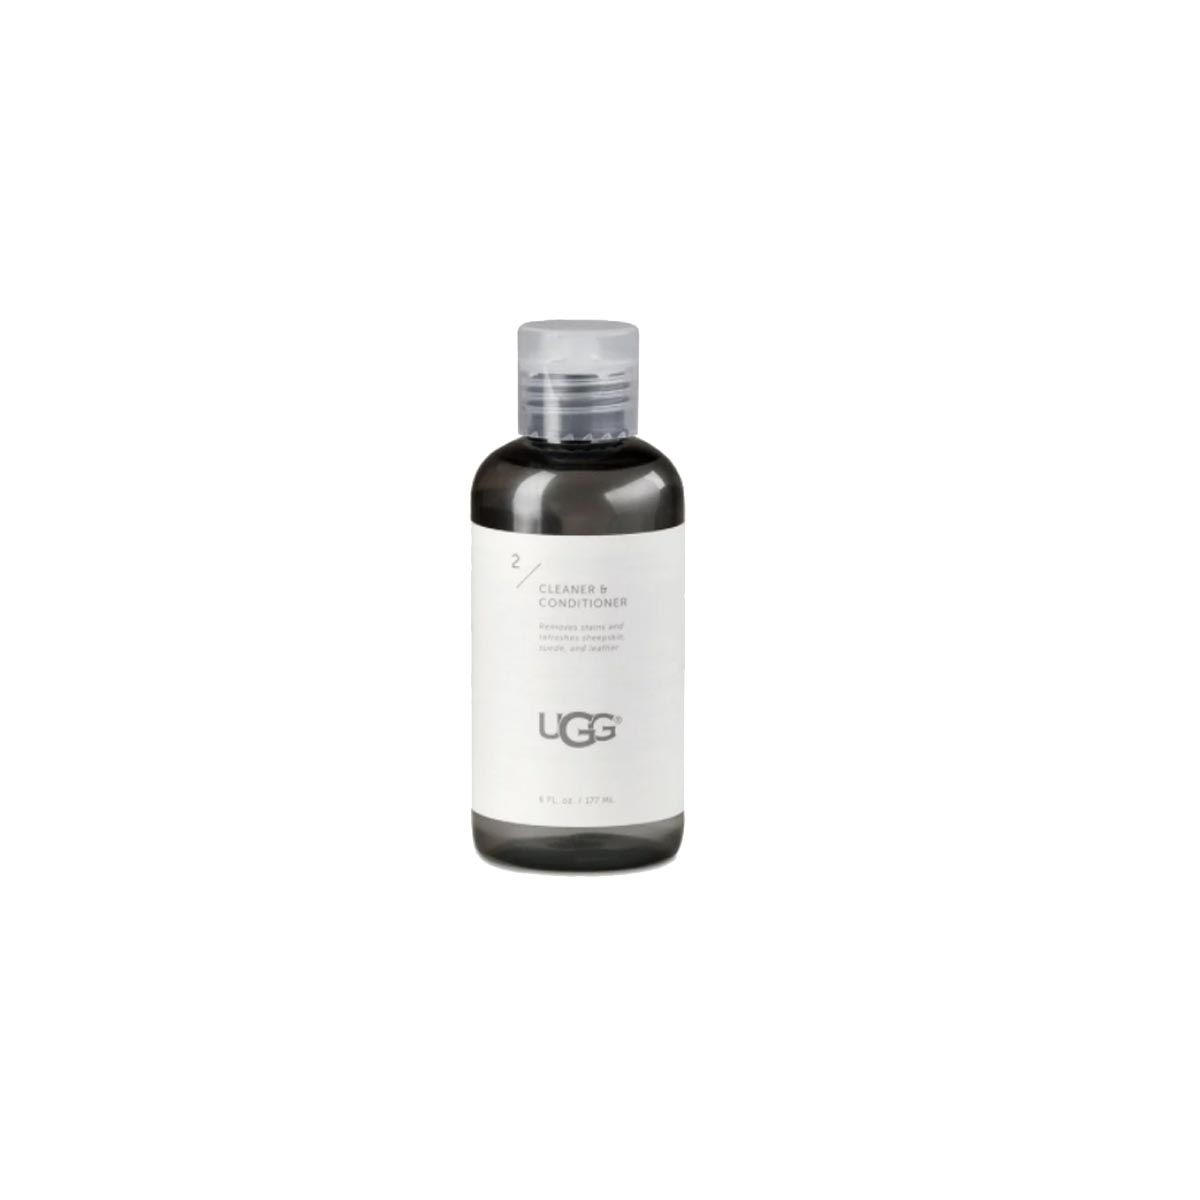 UGG Cleaner and Conditioner